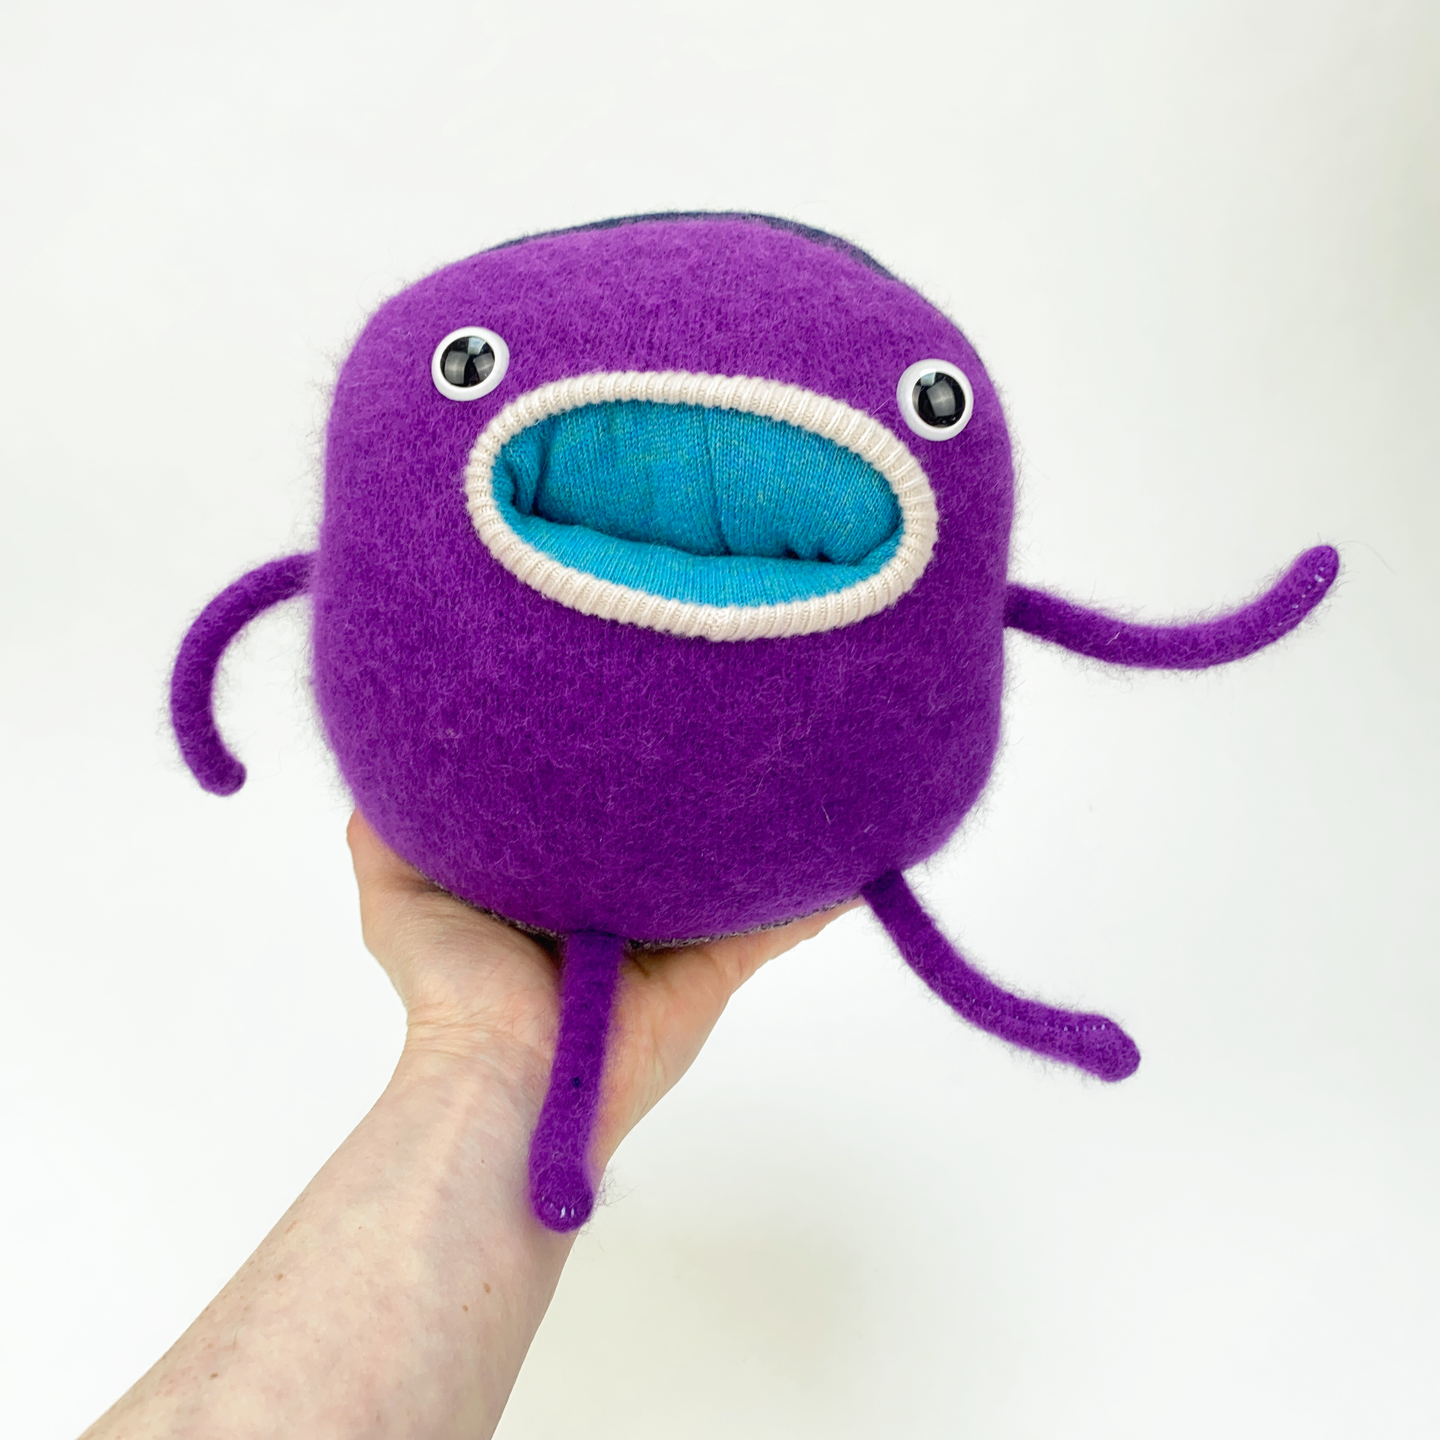 Leslie the plush my friend monster™ sweater toy